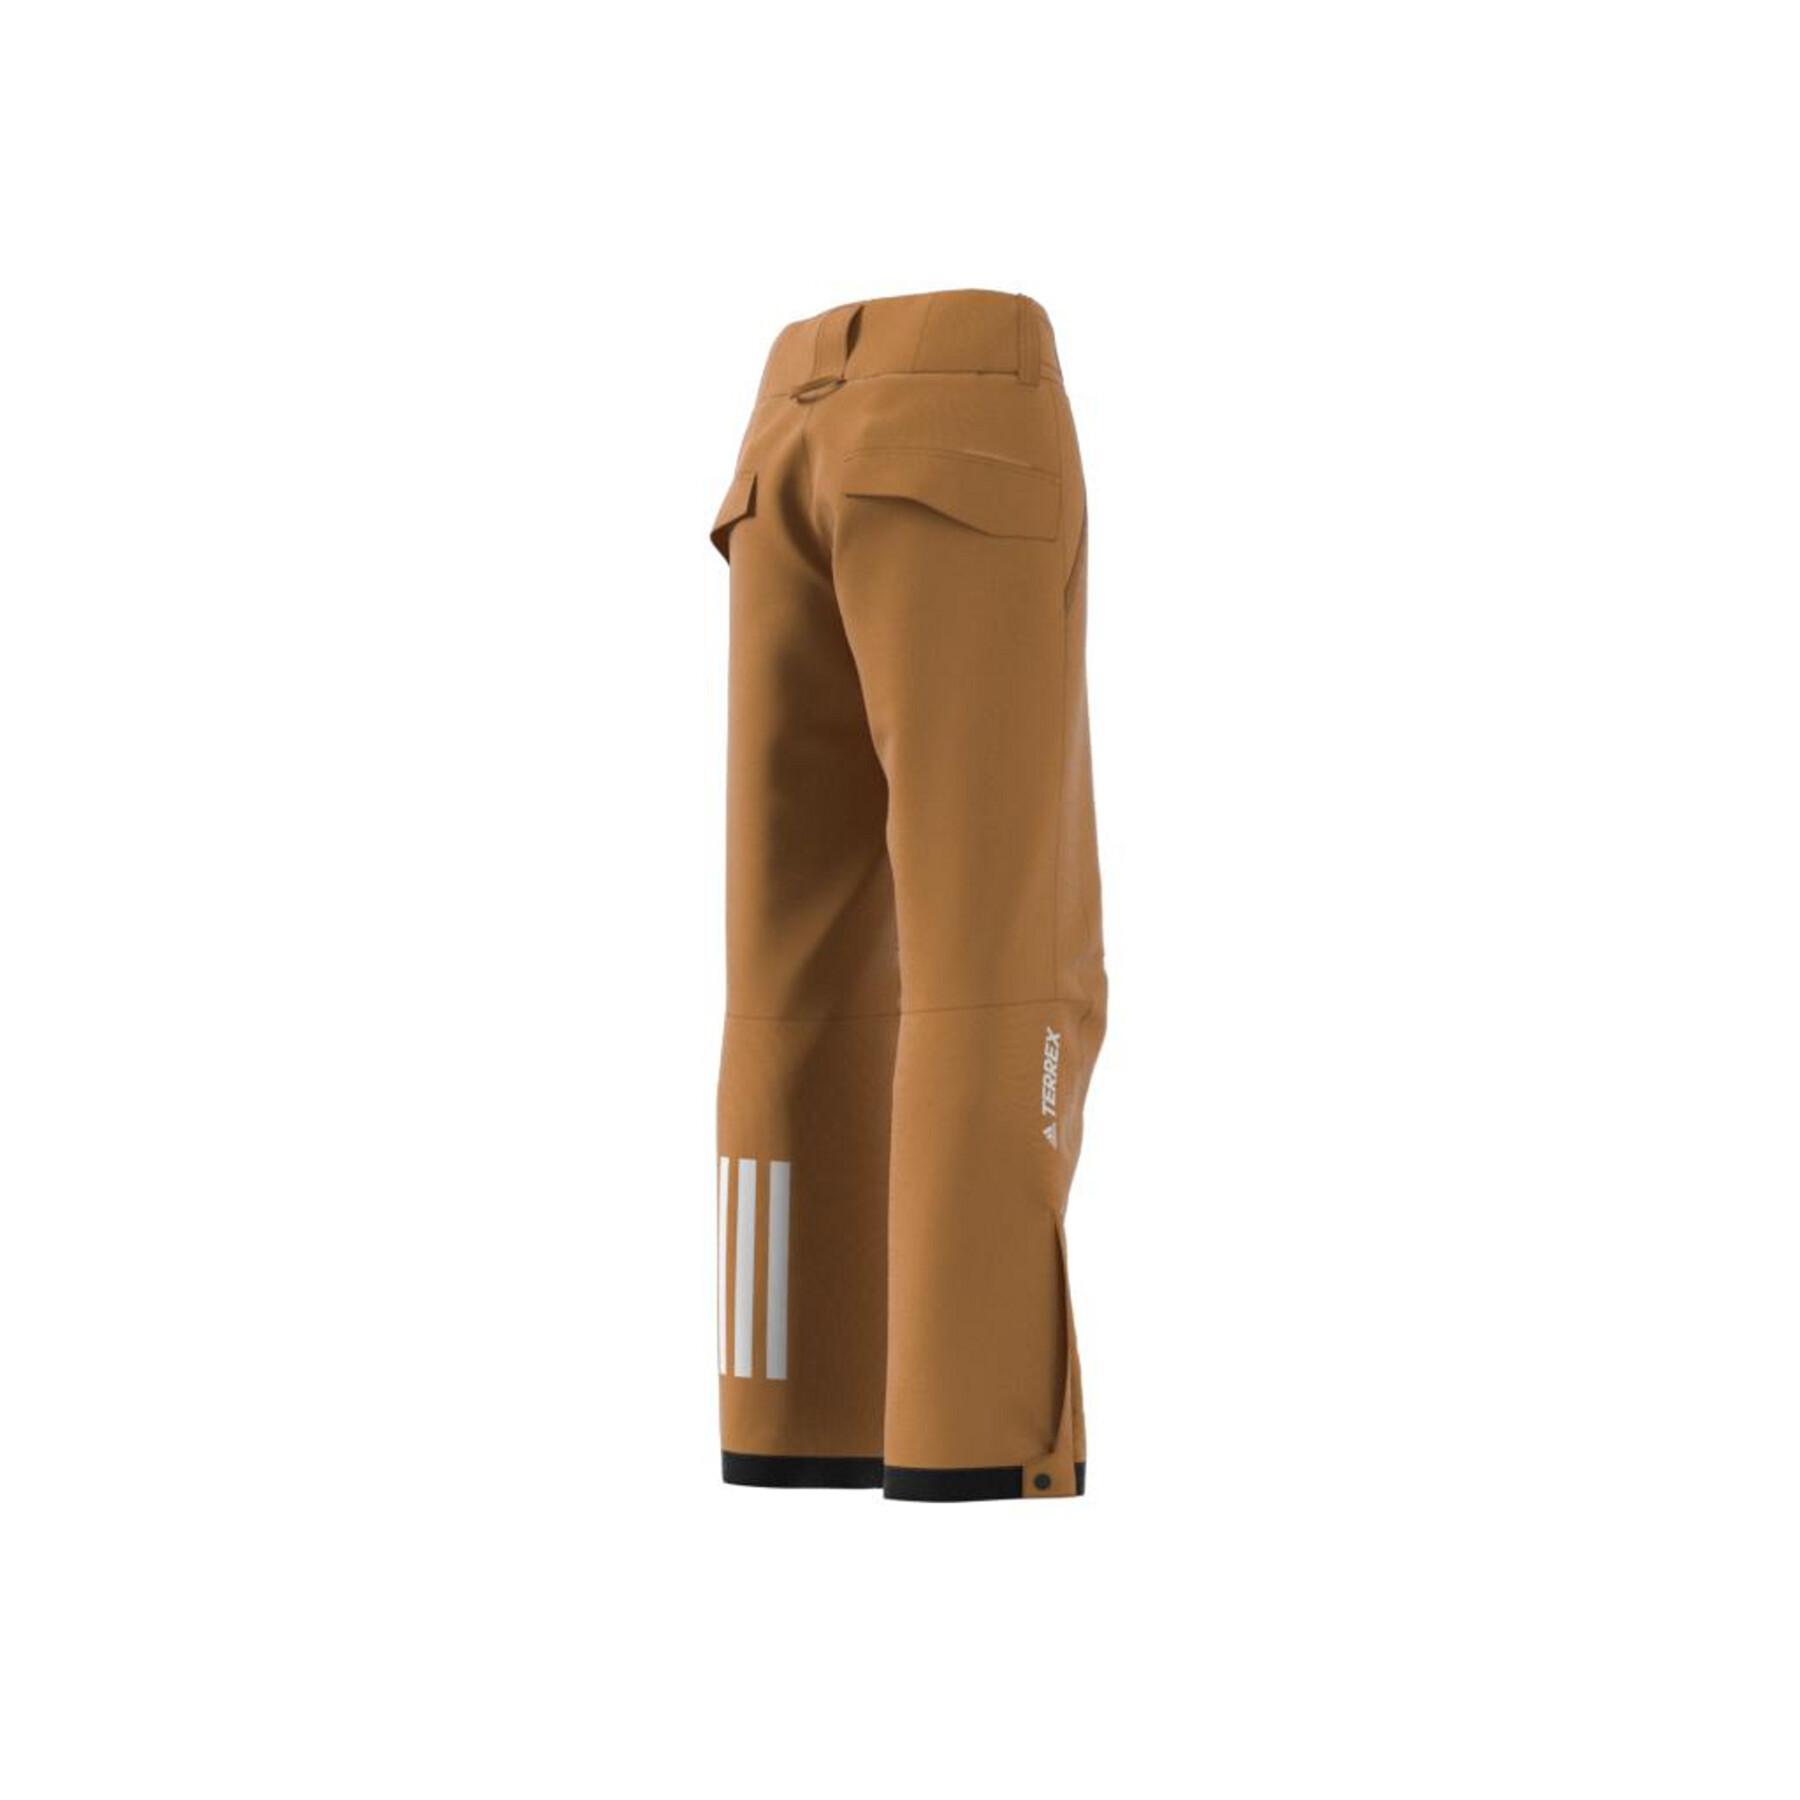 Women's trousers adidas Resort Two-Layer Insulated Stretch